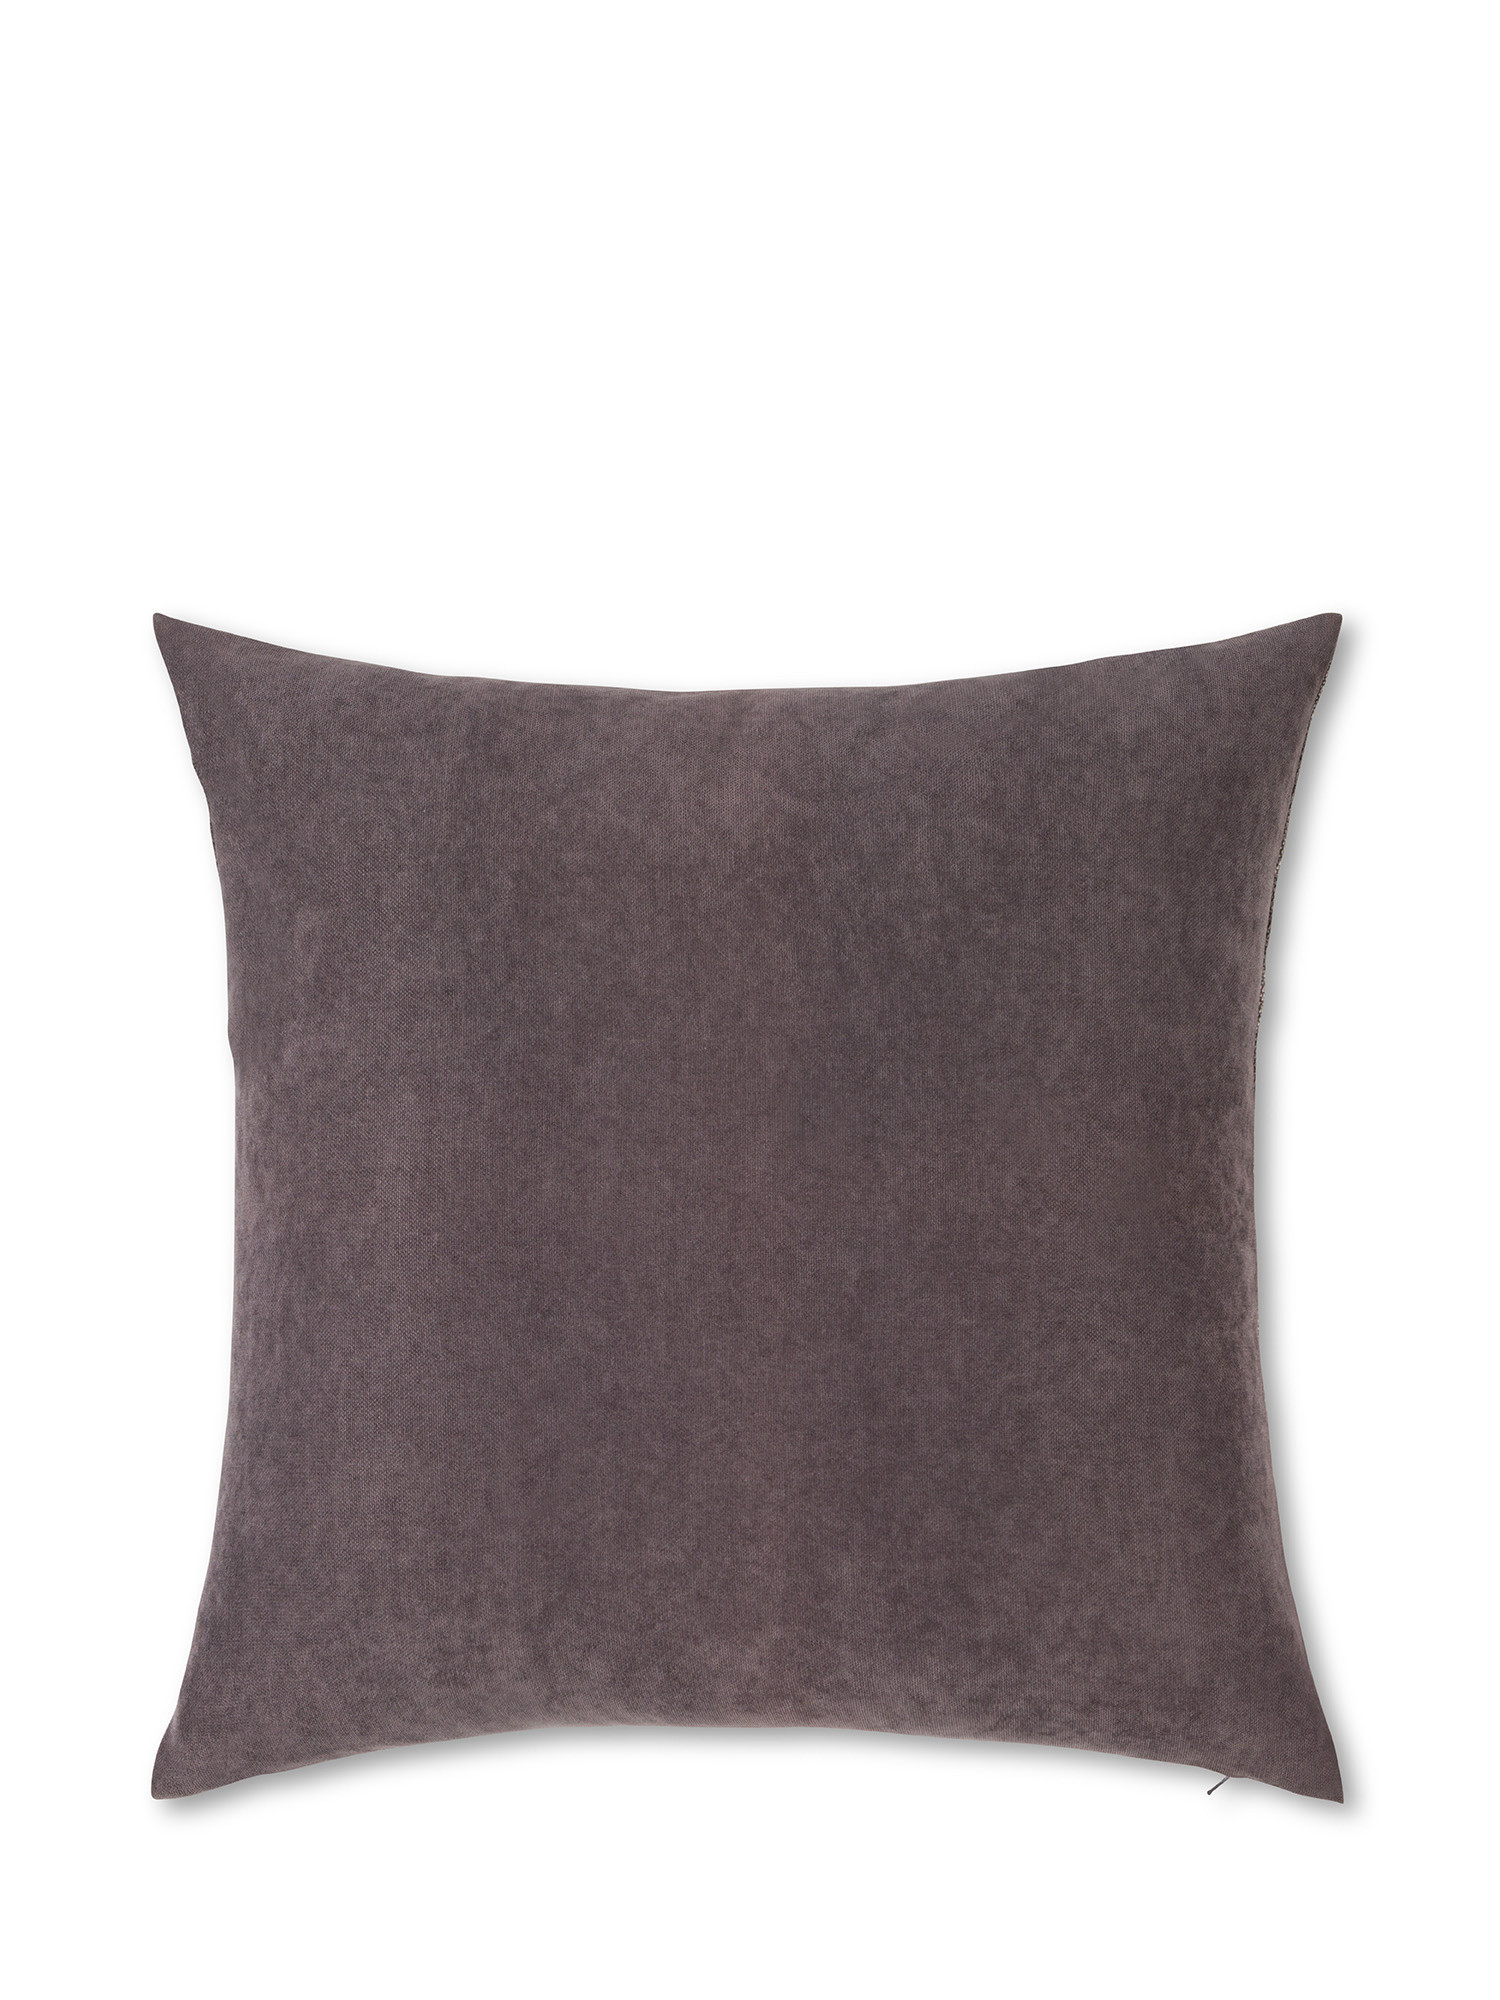 Jacquard cushion with woven pattern 45x45cm, Grey, large image number 1